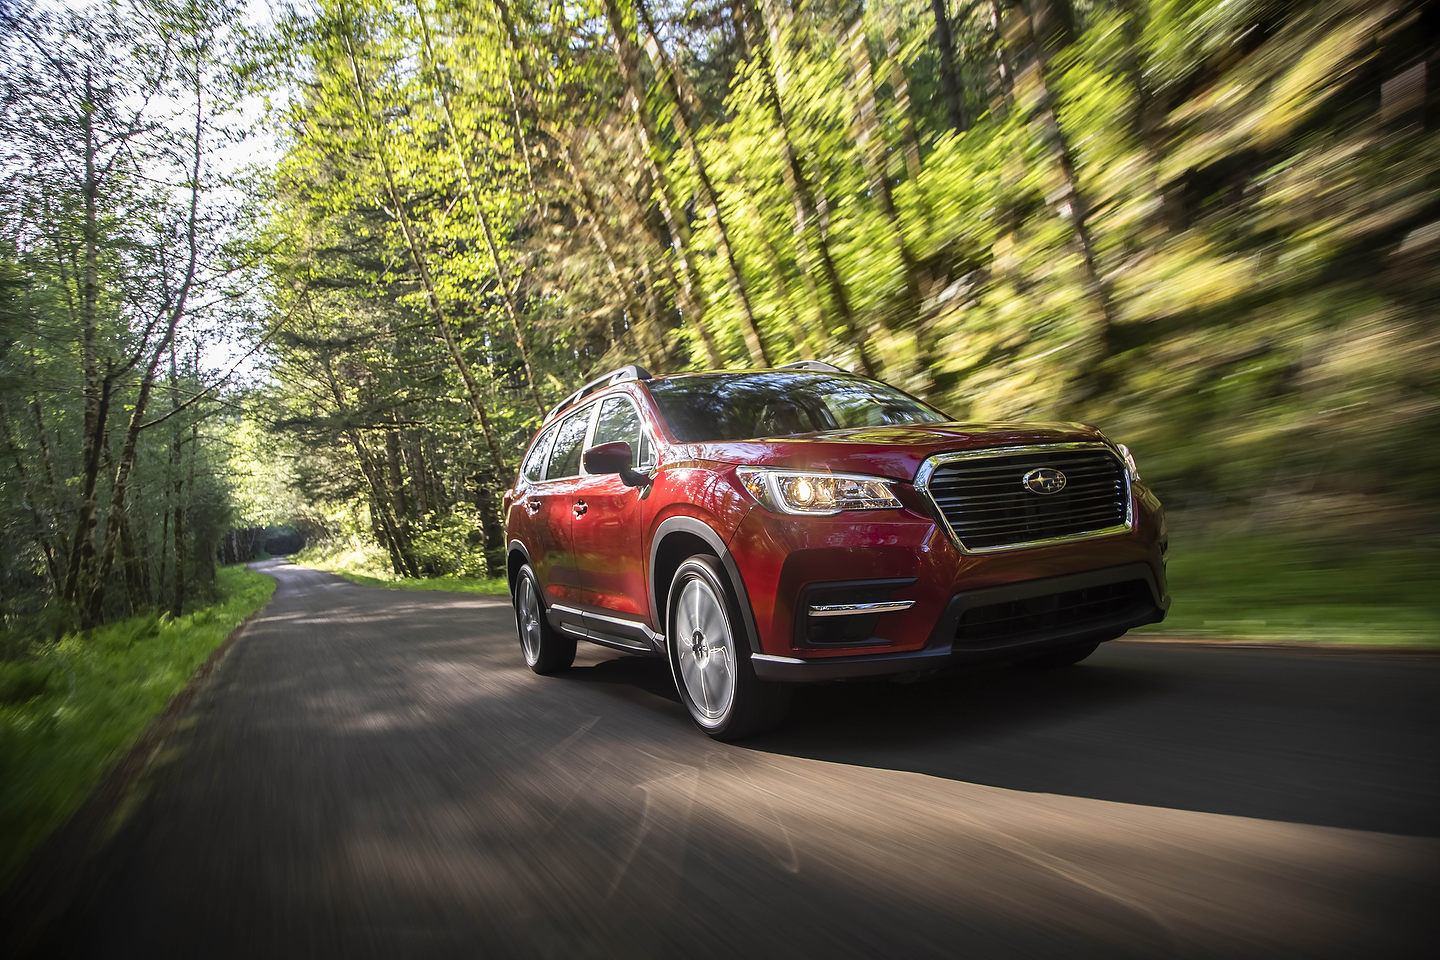 Subaru vehicles receive 9 IIHS TOP SAFETY PICK Awards from the IIHS